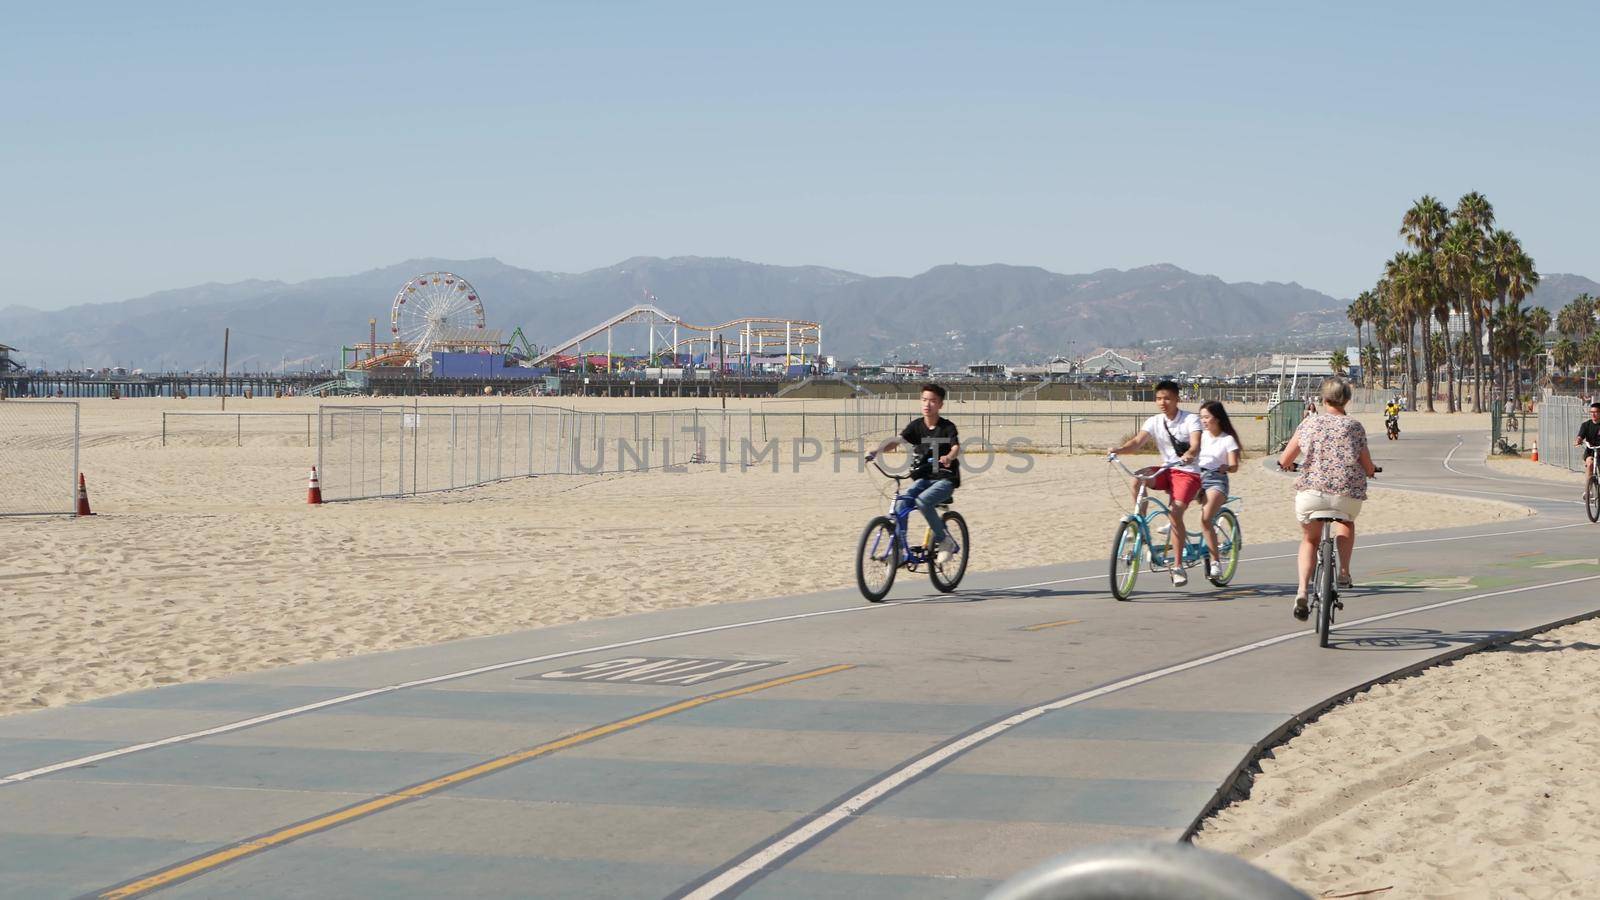 SANTA MONICA, LOS ANGELES CA USA - 28 OCT 2019: California summertime beach aesthetic, people walking and ride cycles on bicycle path. Amusement park on pier and palms. American pacific ocean resort.